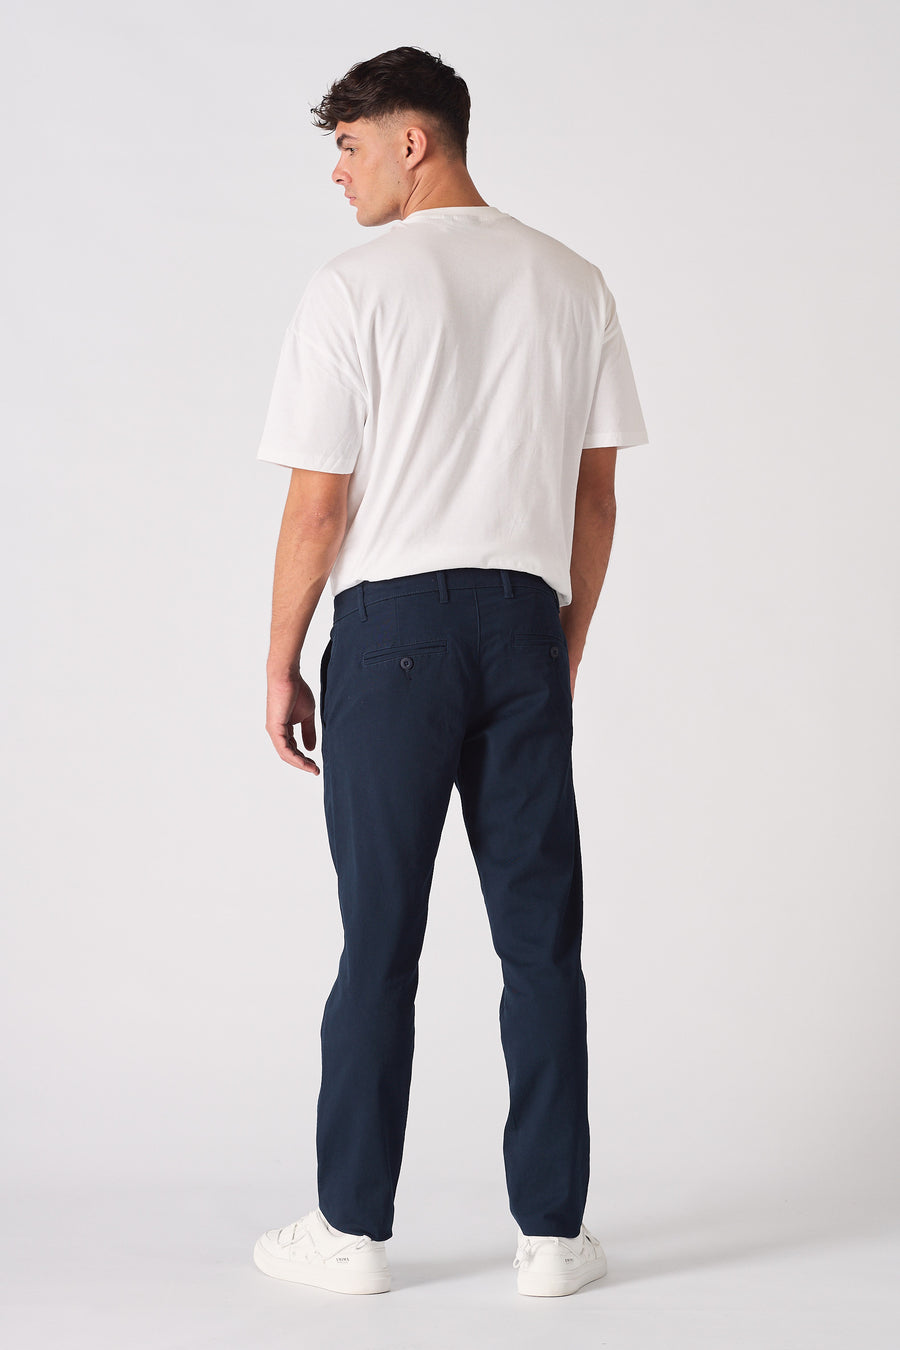 SLIM FIT CHINO TROUSER - NAVY BLUE